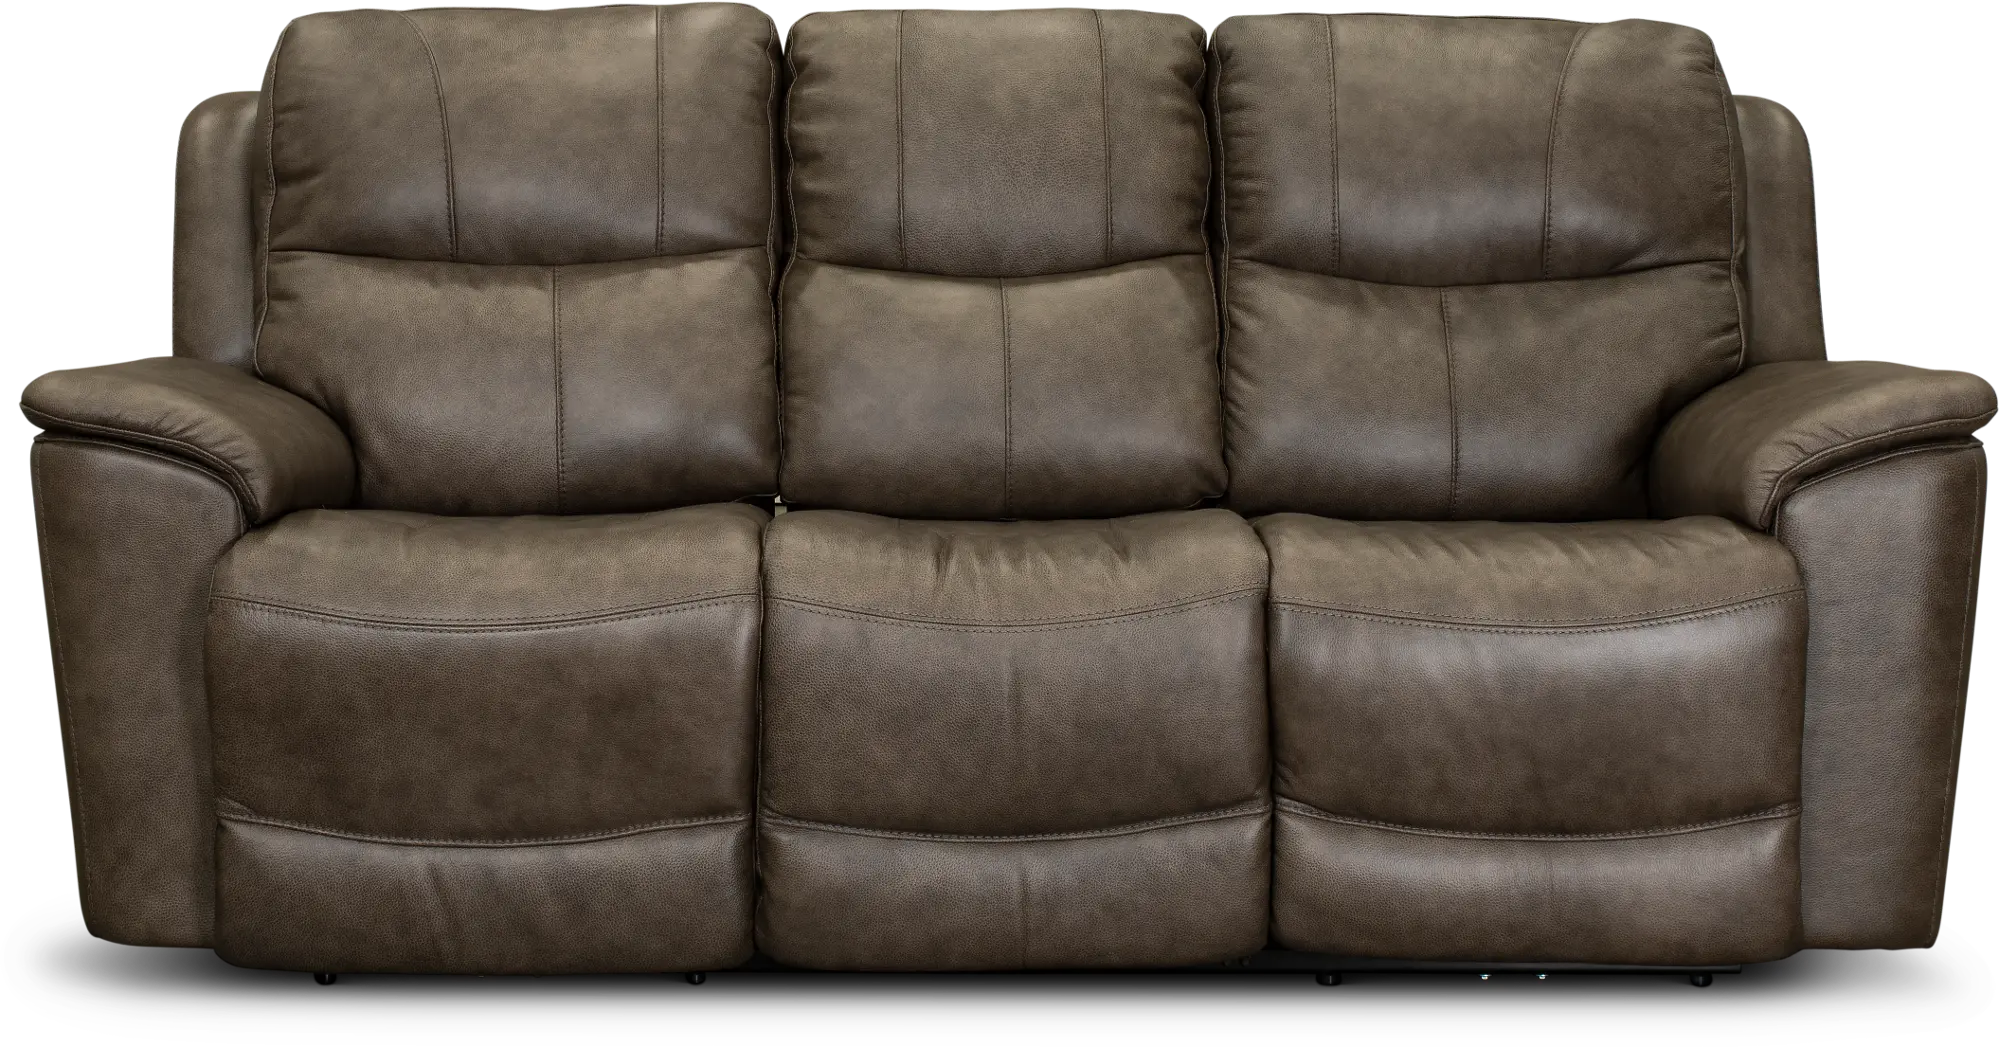 Premium Photo  A brown leather couch with a foot rest sits in front of